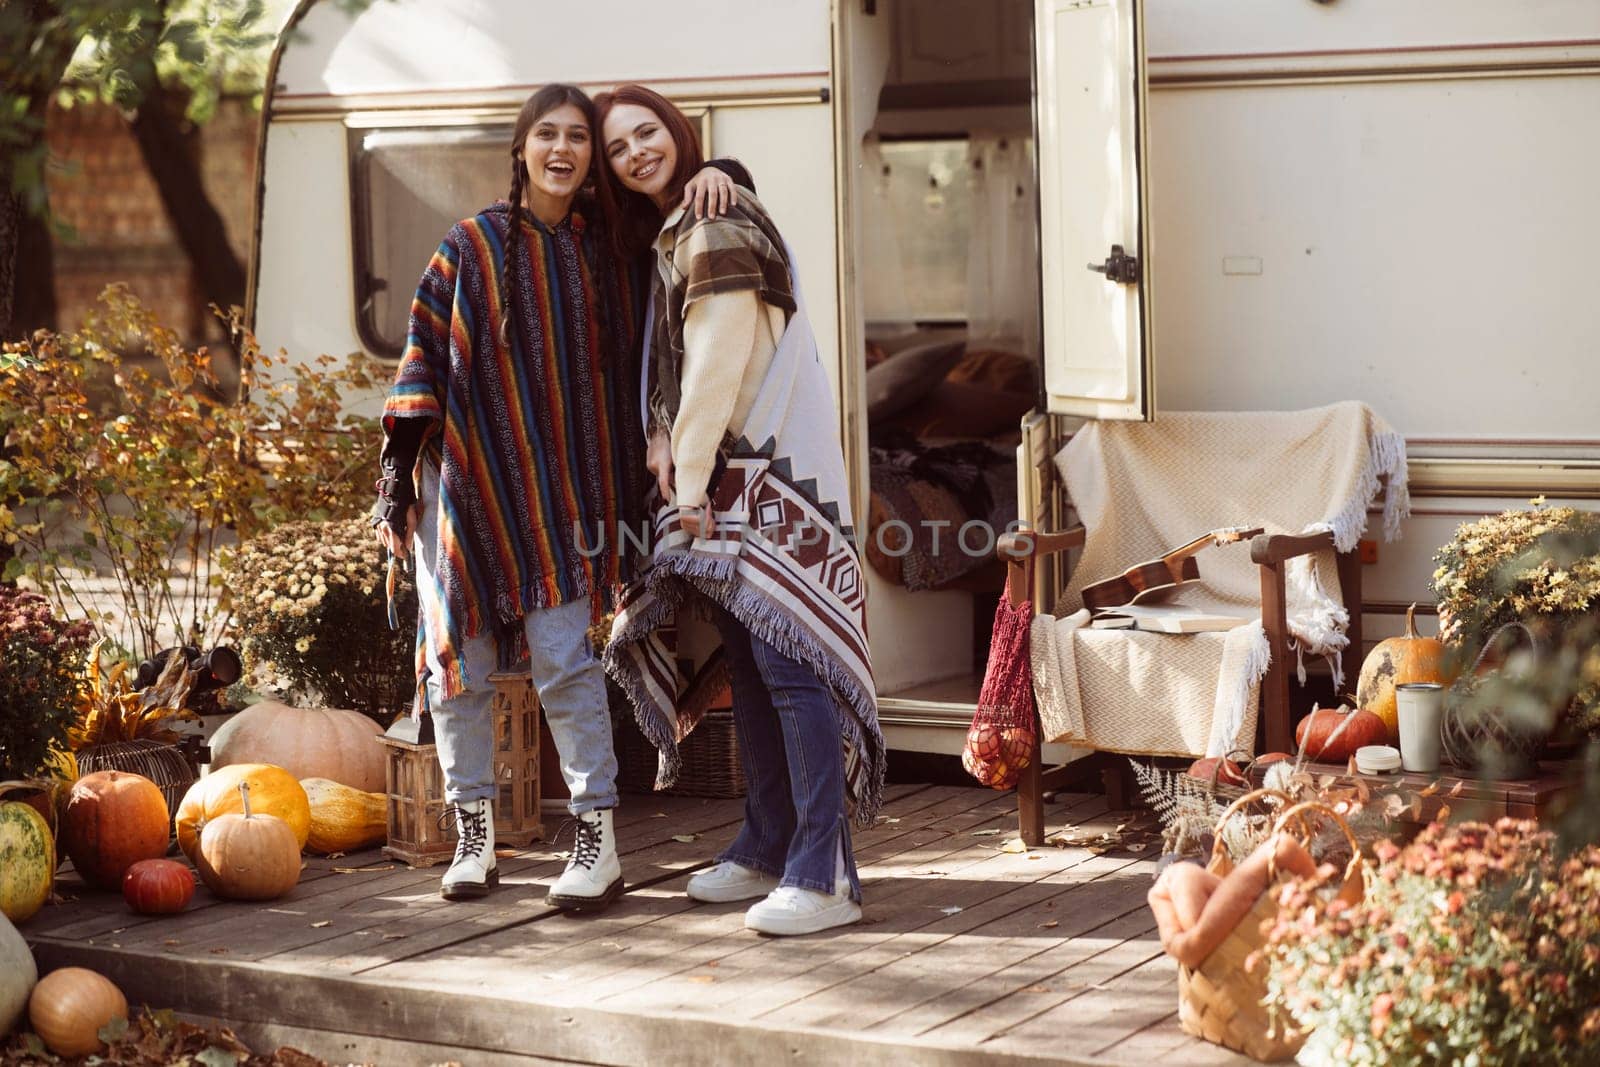 A pair of fashionable young women rock bohemian looks in front of a trailer. by teksomolika